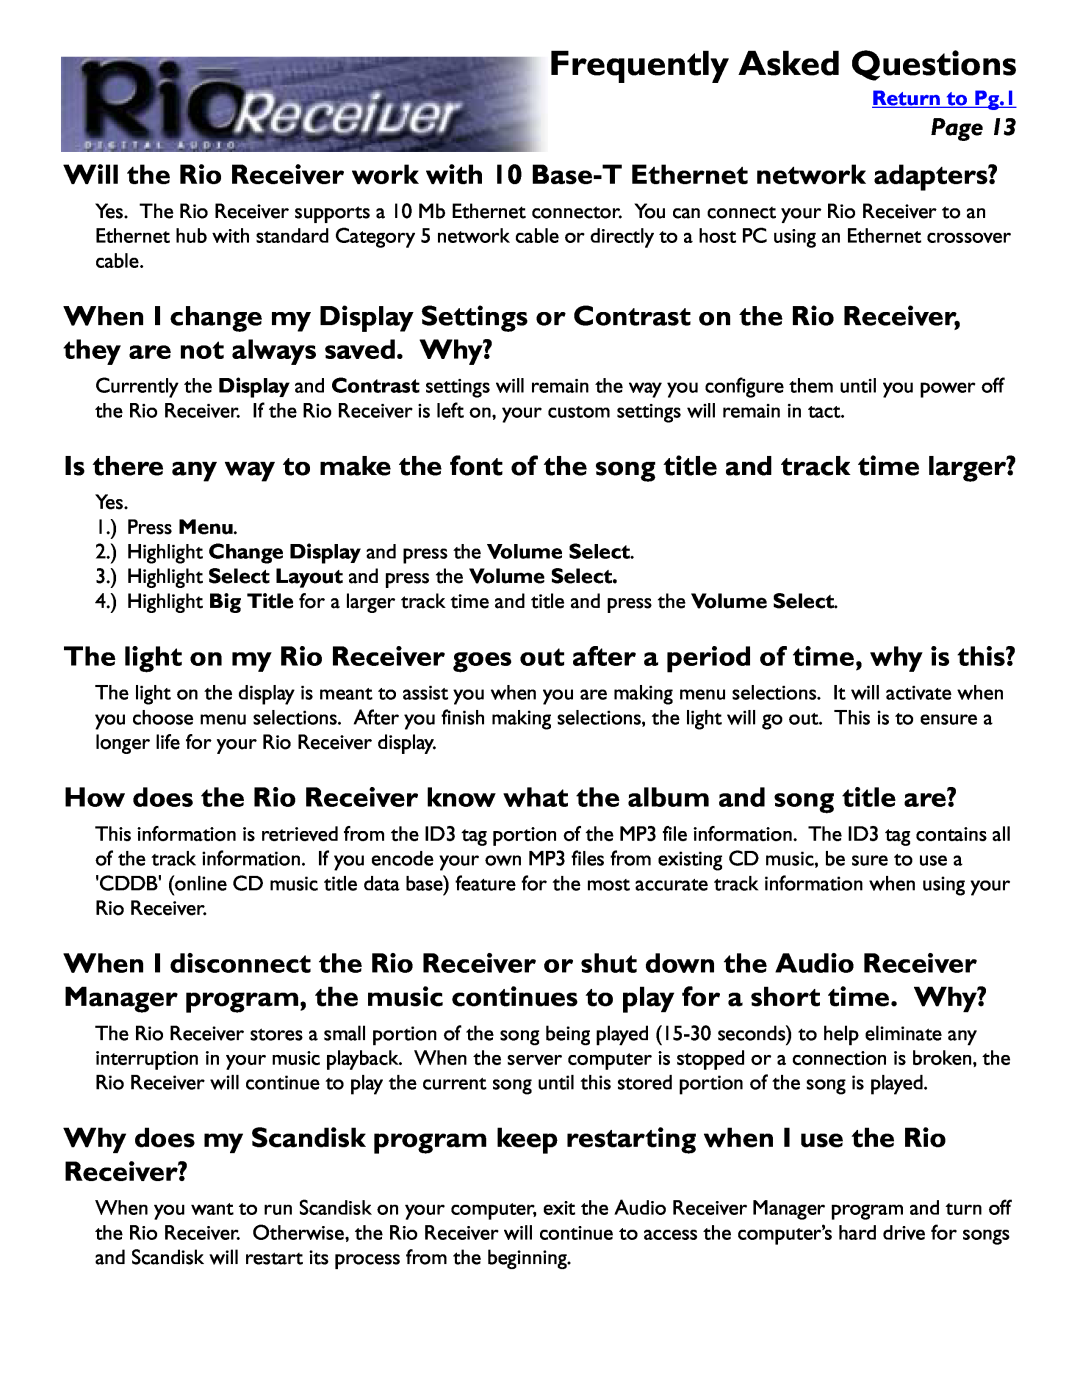 Rio Audio Digital Audio Receiver manual Frequently Asked Questions, Yes 1. Press Menu 